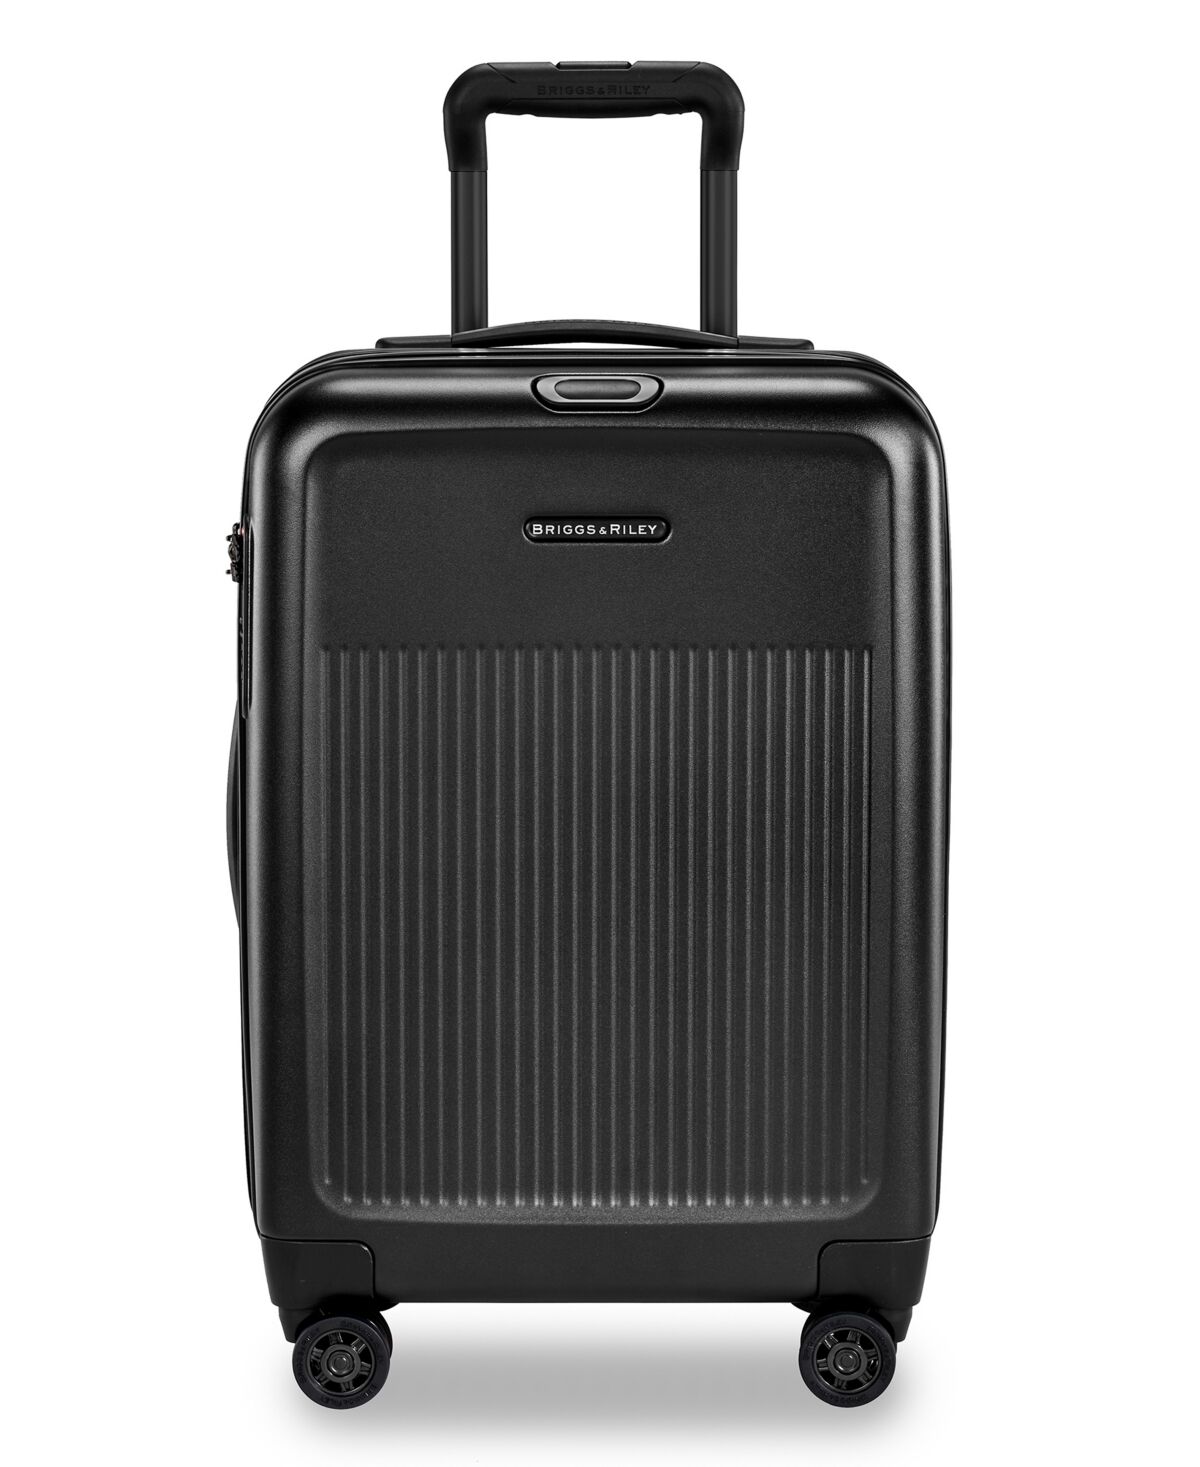 Briggs & Riley International Carry-On Expandable Spinner - Black